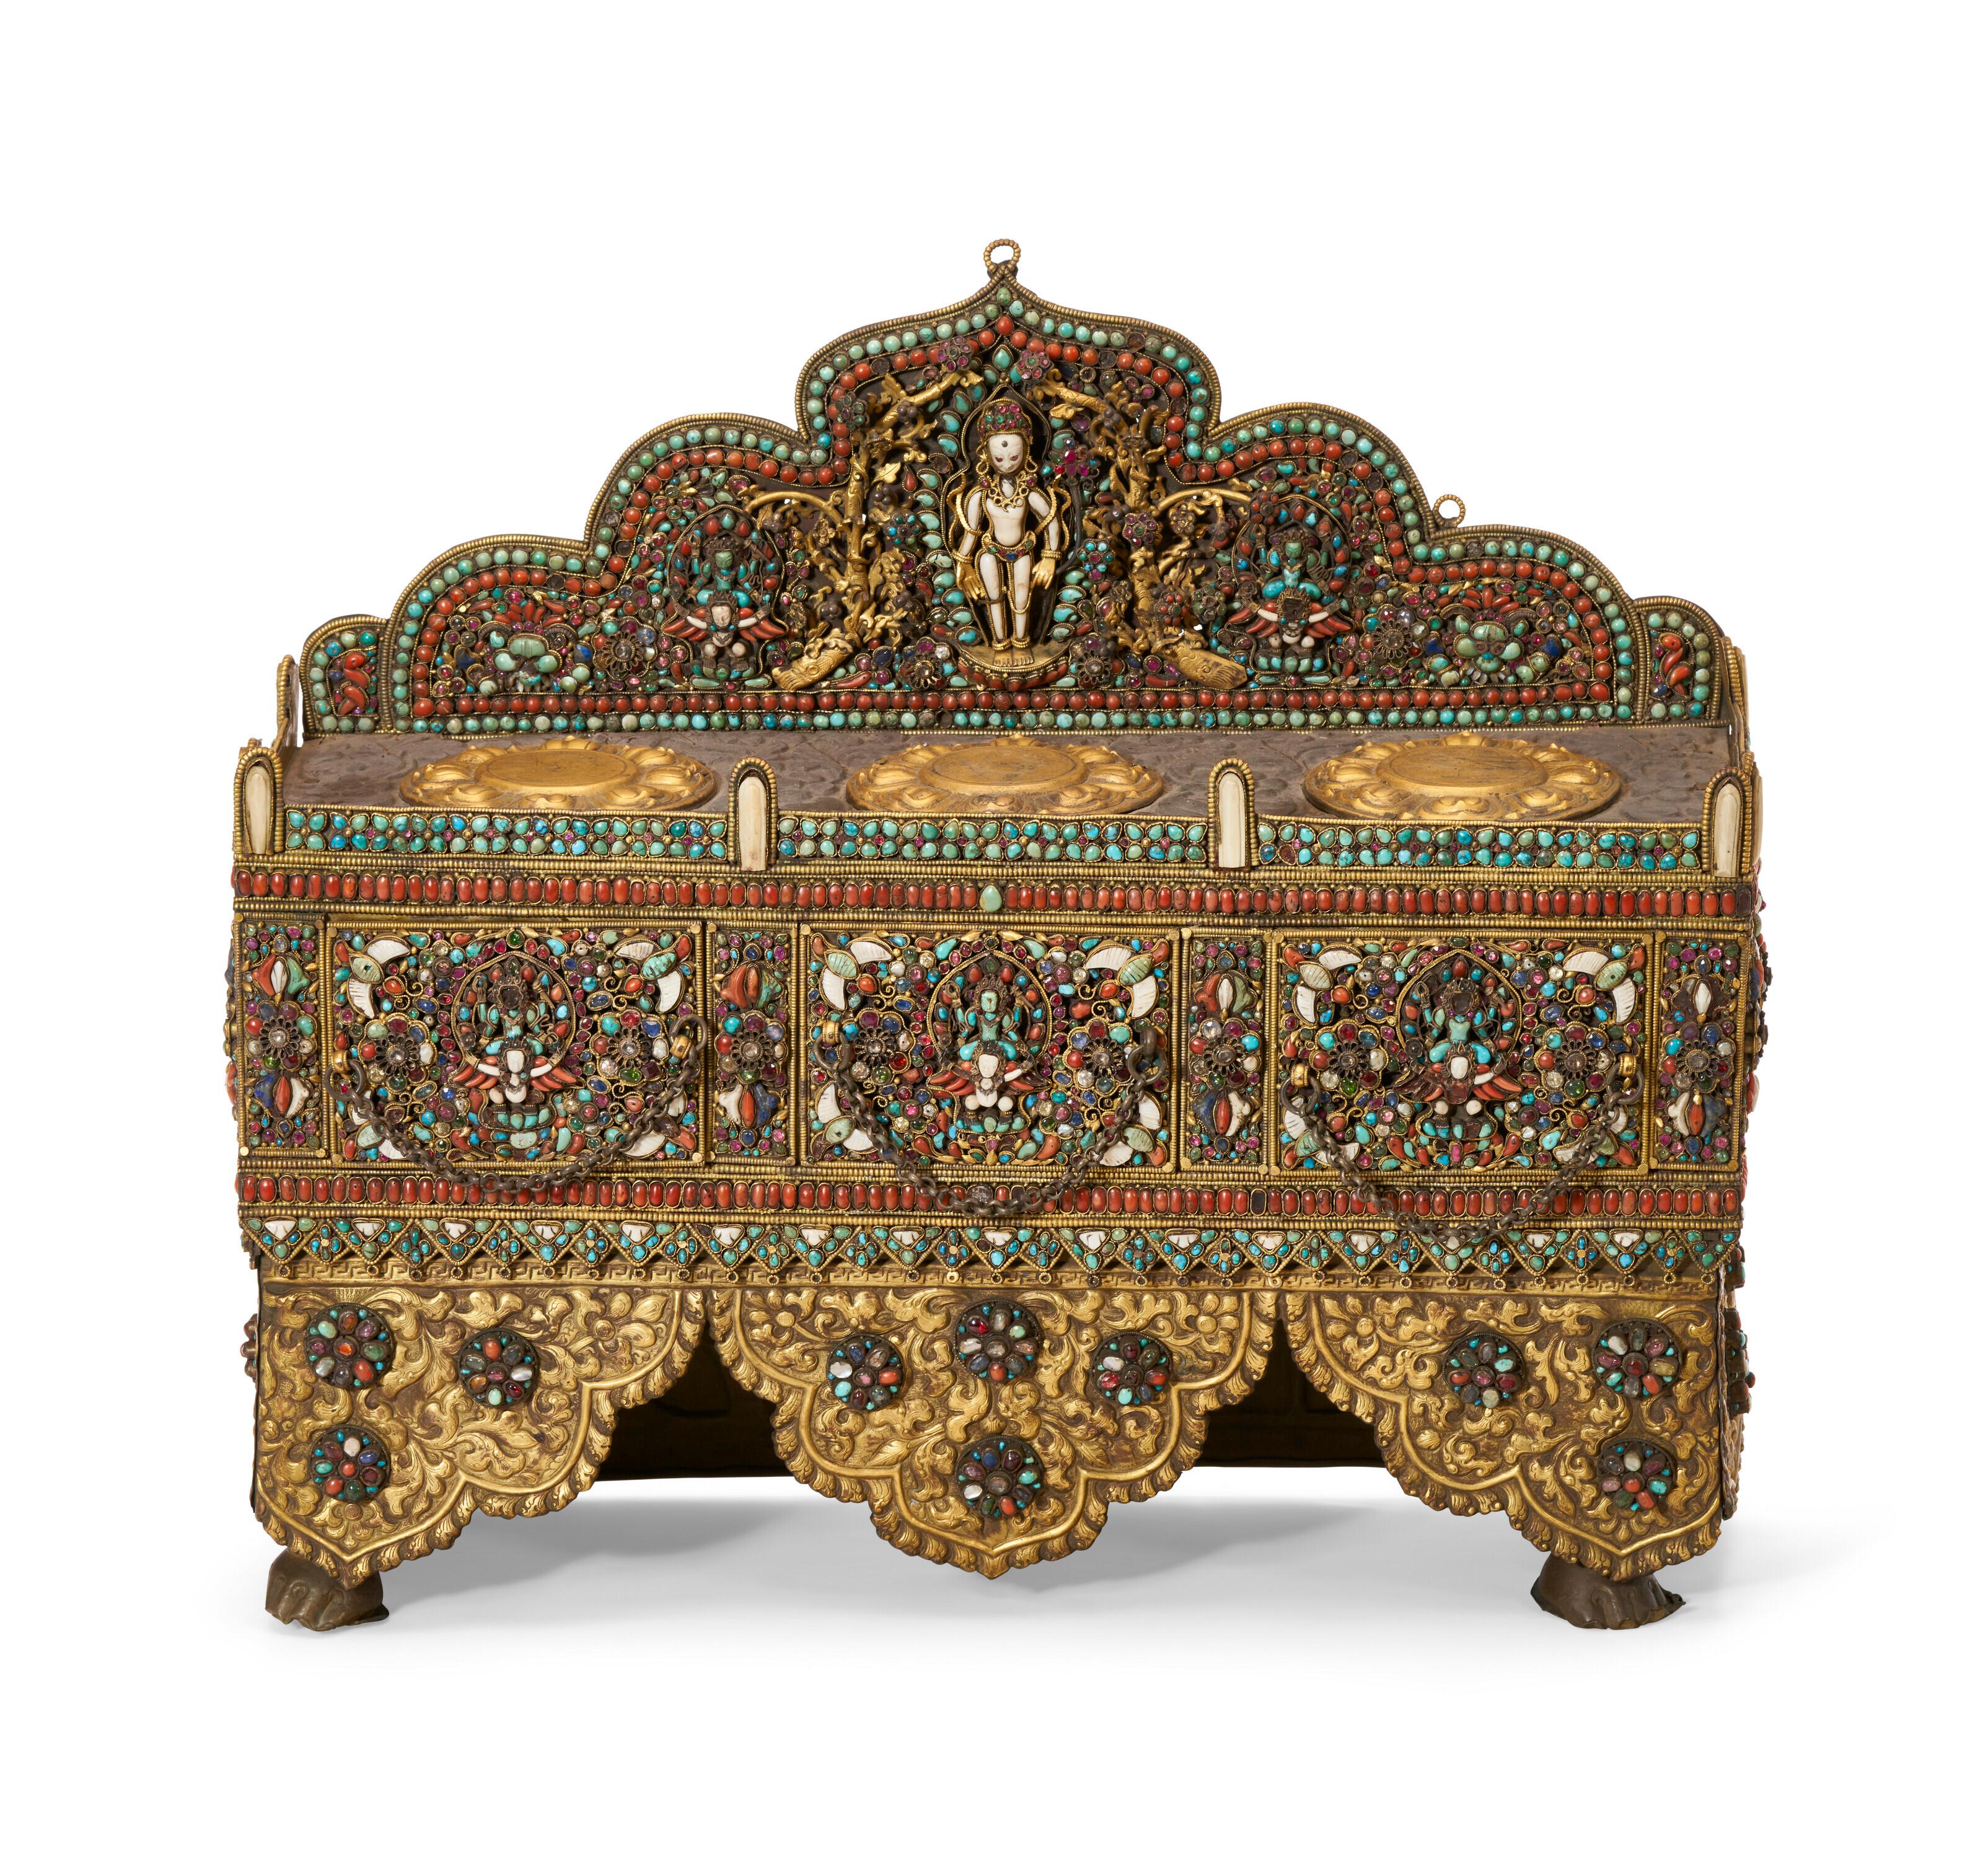 18th/19th Century Nepalese Inlaid and Gilt Silver and Copper Altar In Good Condition For Sale In New York, US